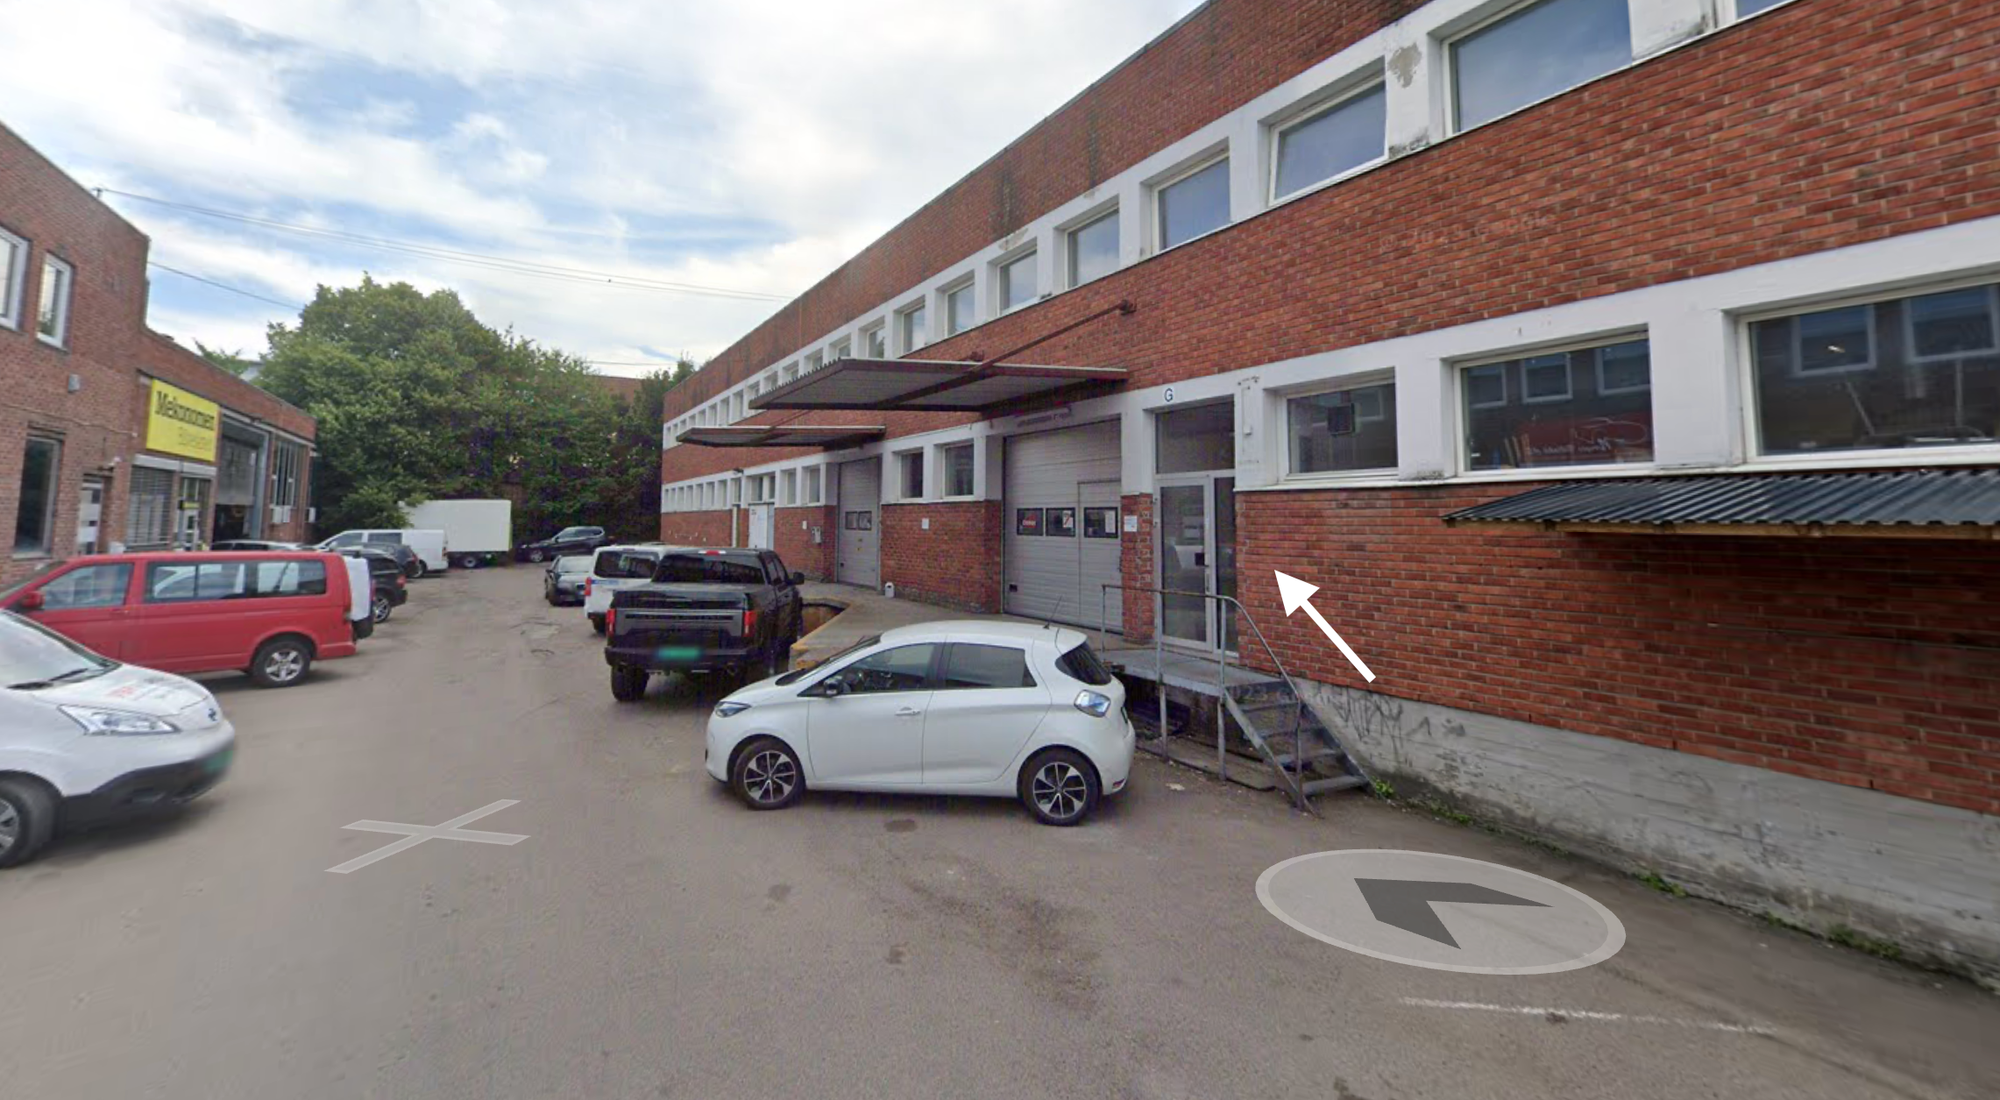 Screenshot of google streetview showing to low industrial brick buildings with cars parked in between